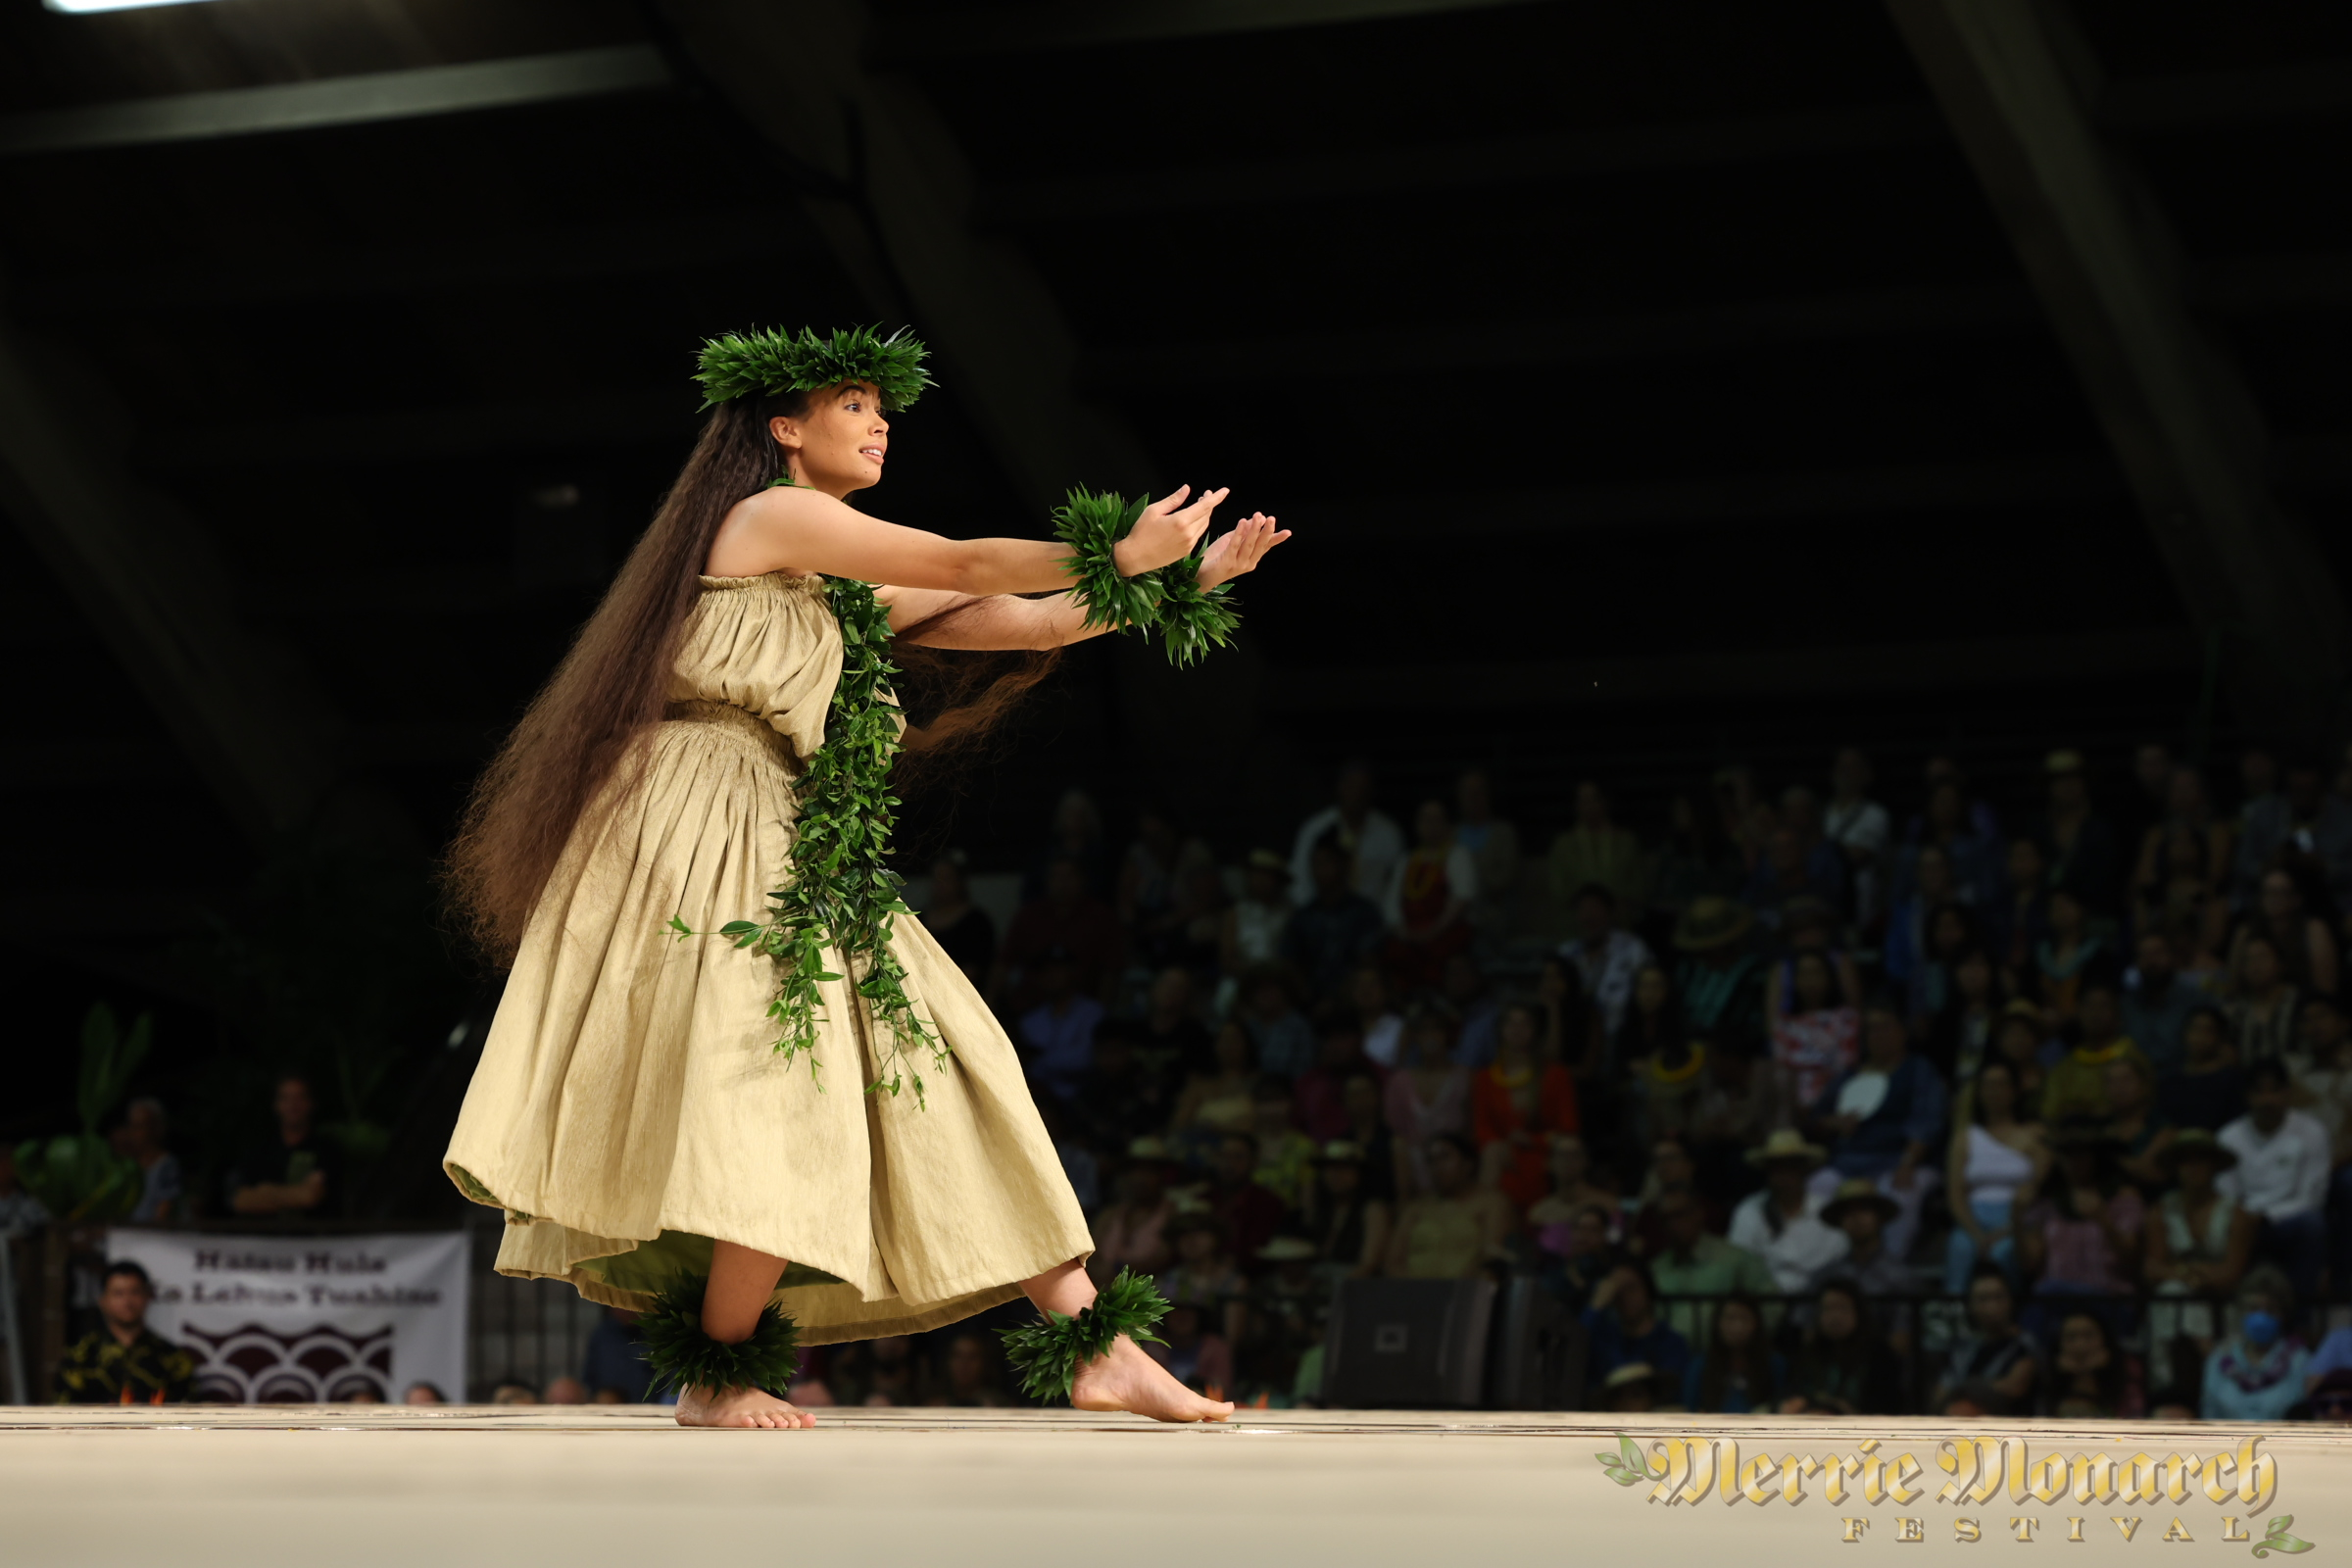 Merrie Monarch | The Official Site of the Merrie Monarch Festival